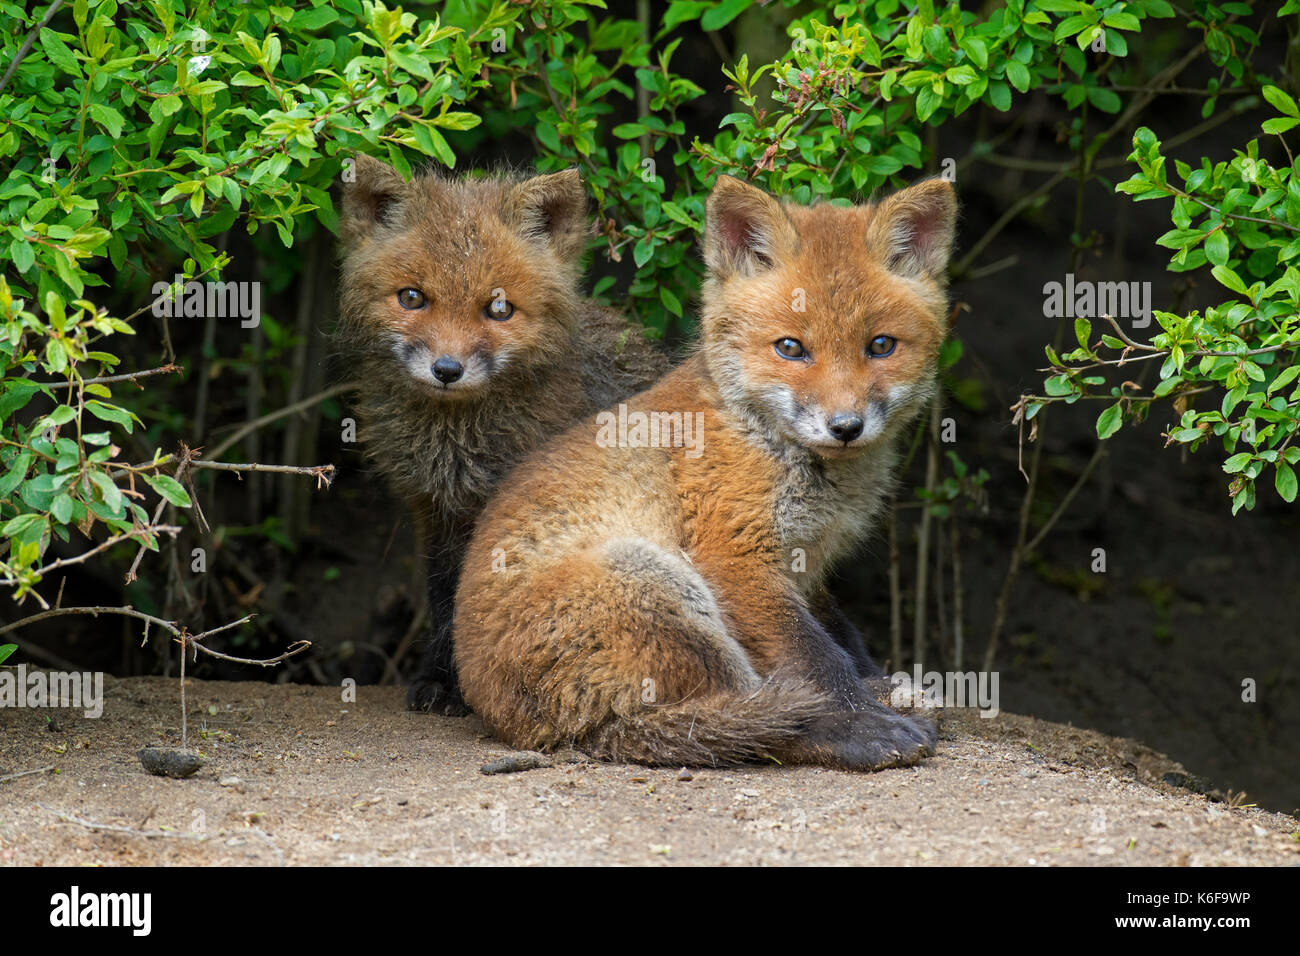 Two cute young red foxes (Vulpes vulpes) emerging from thicket in spring Stock Photo